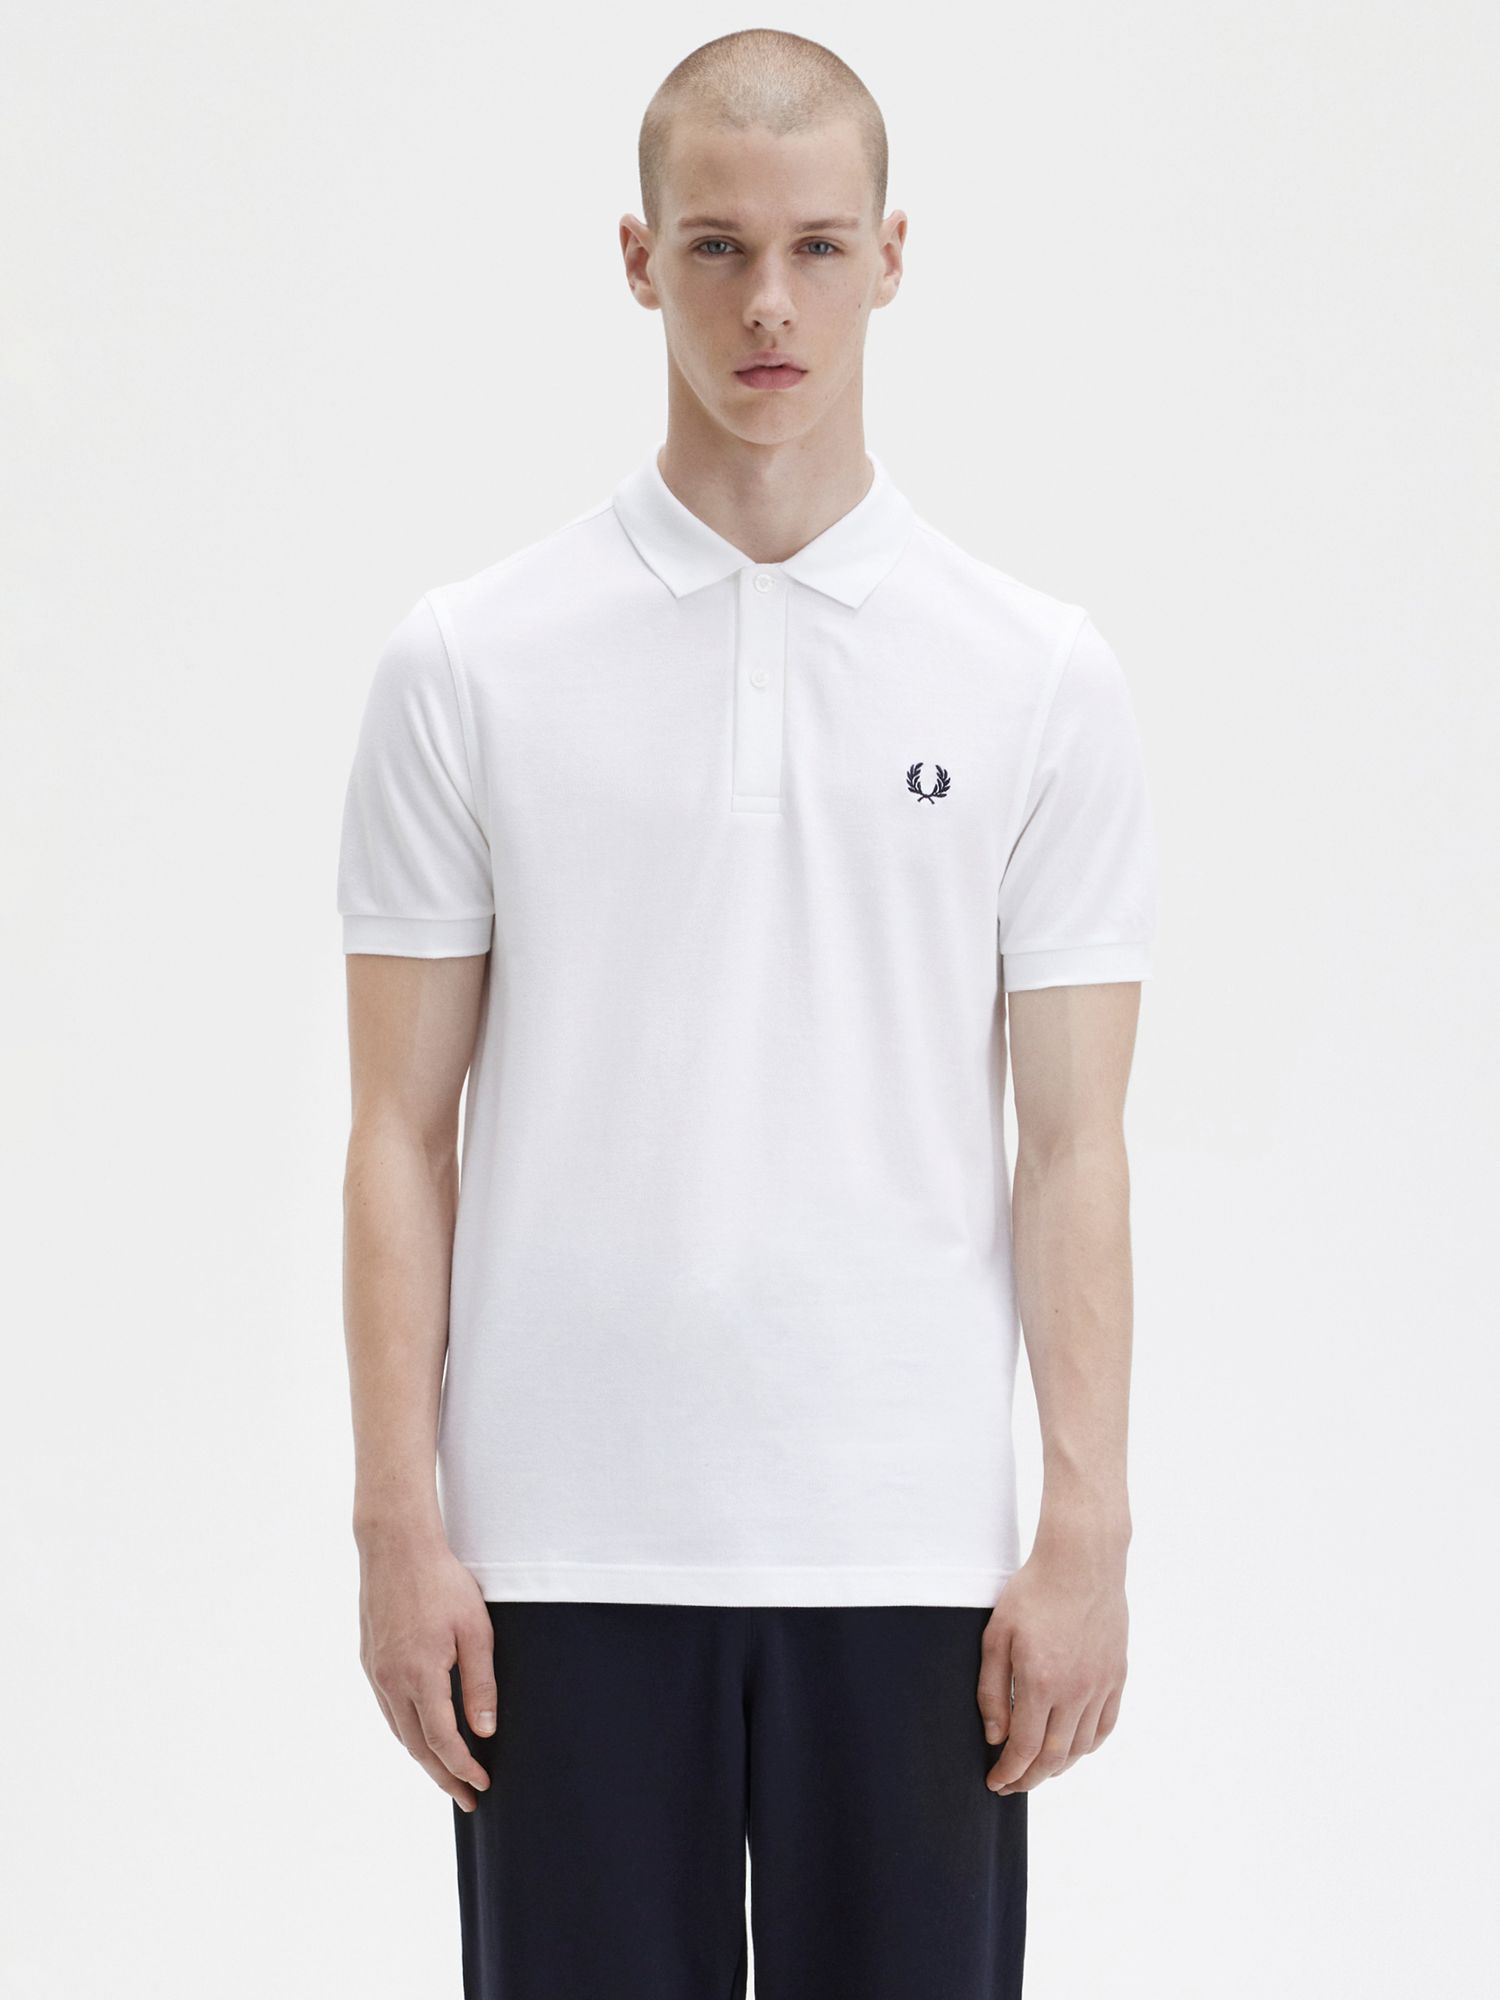 Fred Perry Plain Polo | vlr.eng.br